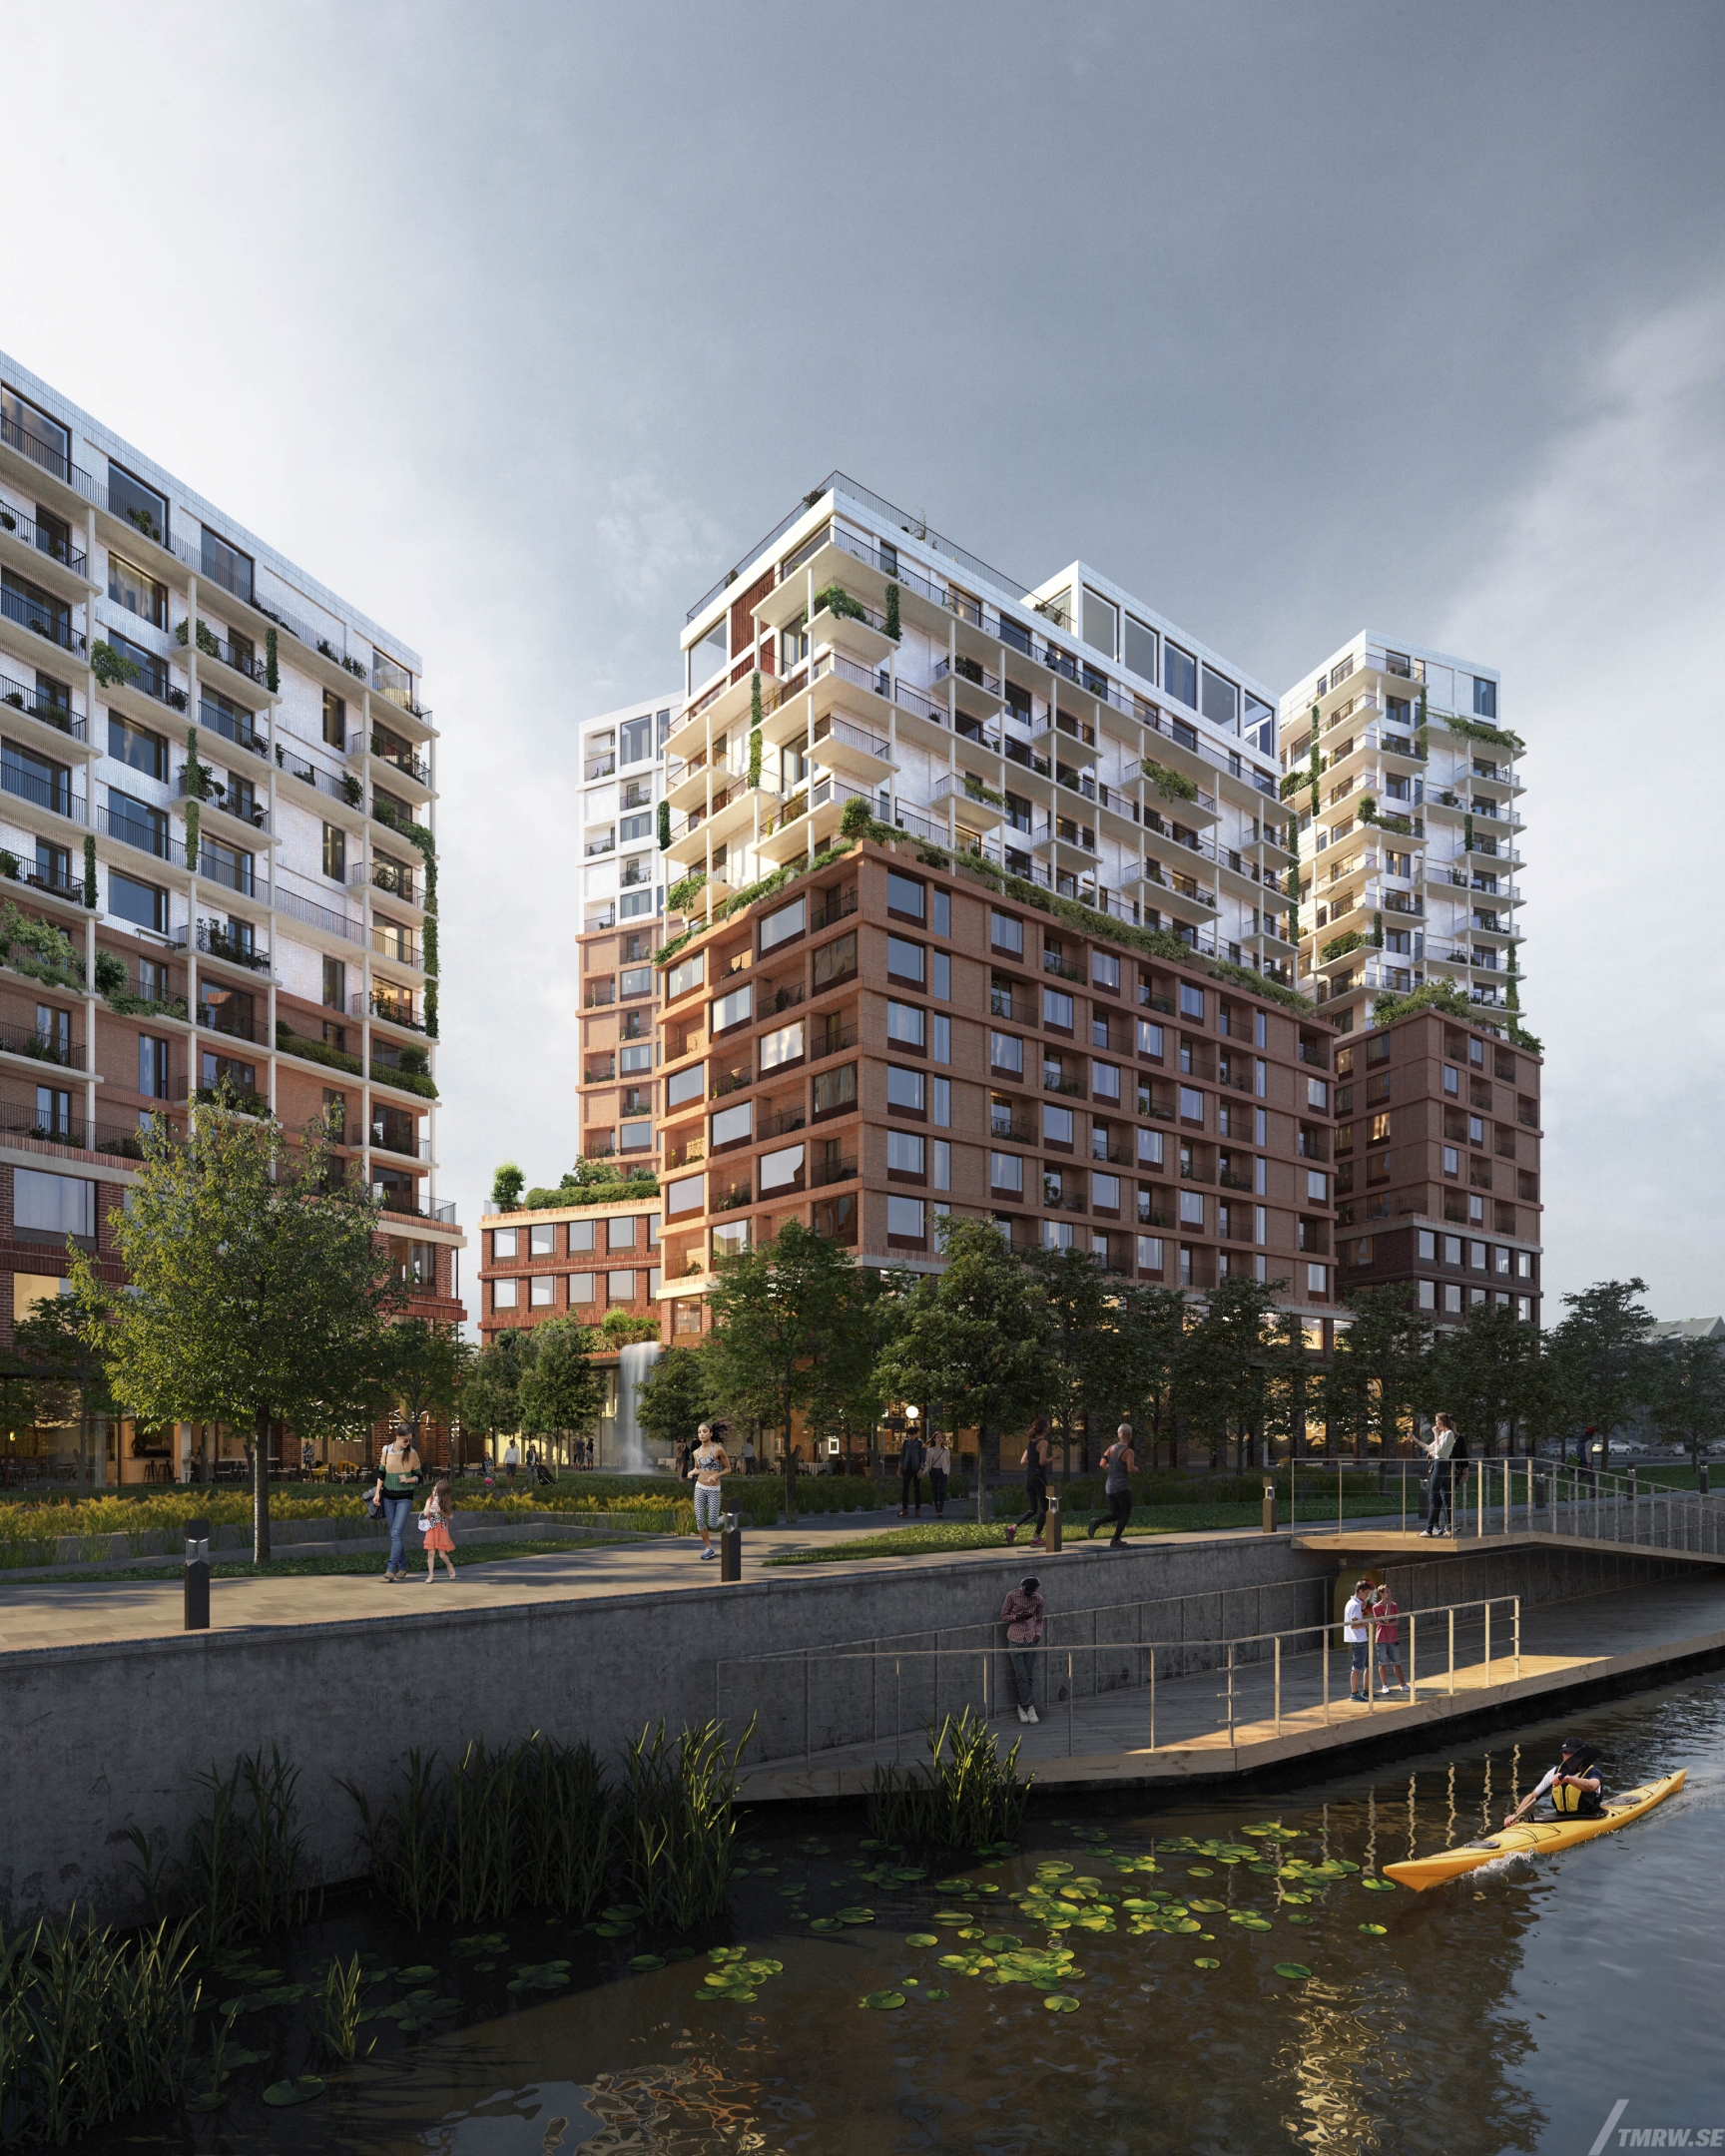 Architectural visualization of Montreal for White, residential buildings, kayak in channel